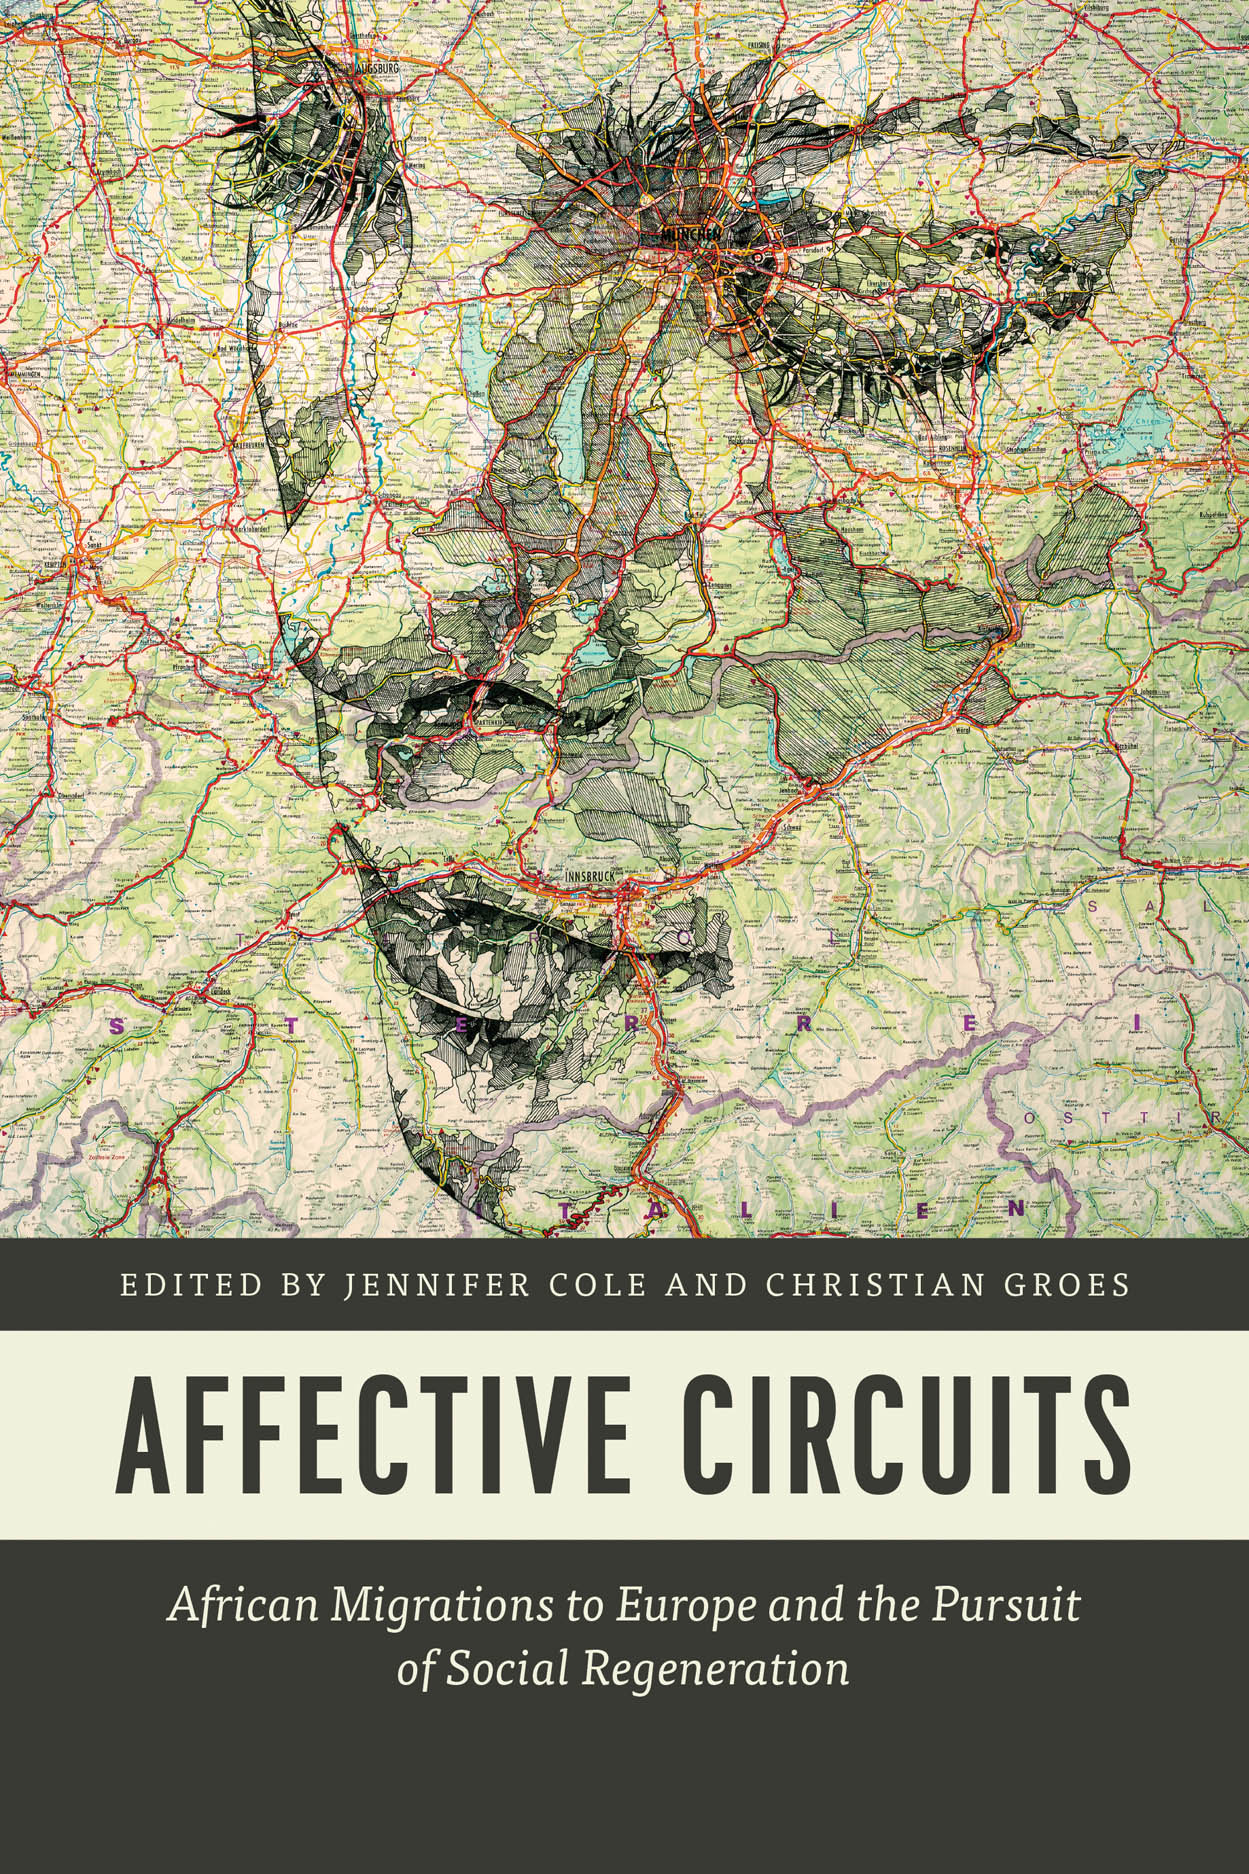 Book_Cover_Affective_Circuits1.jpg